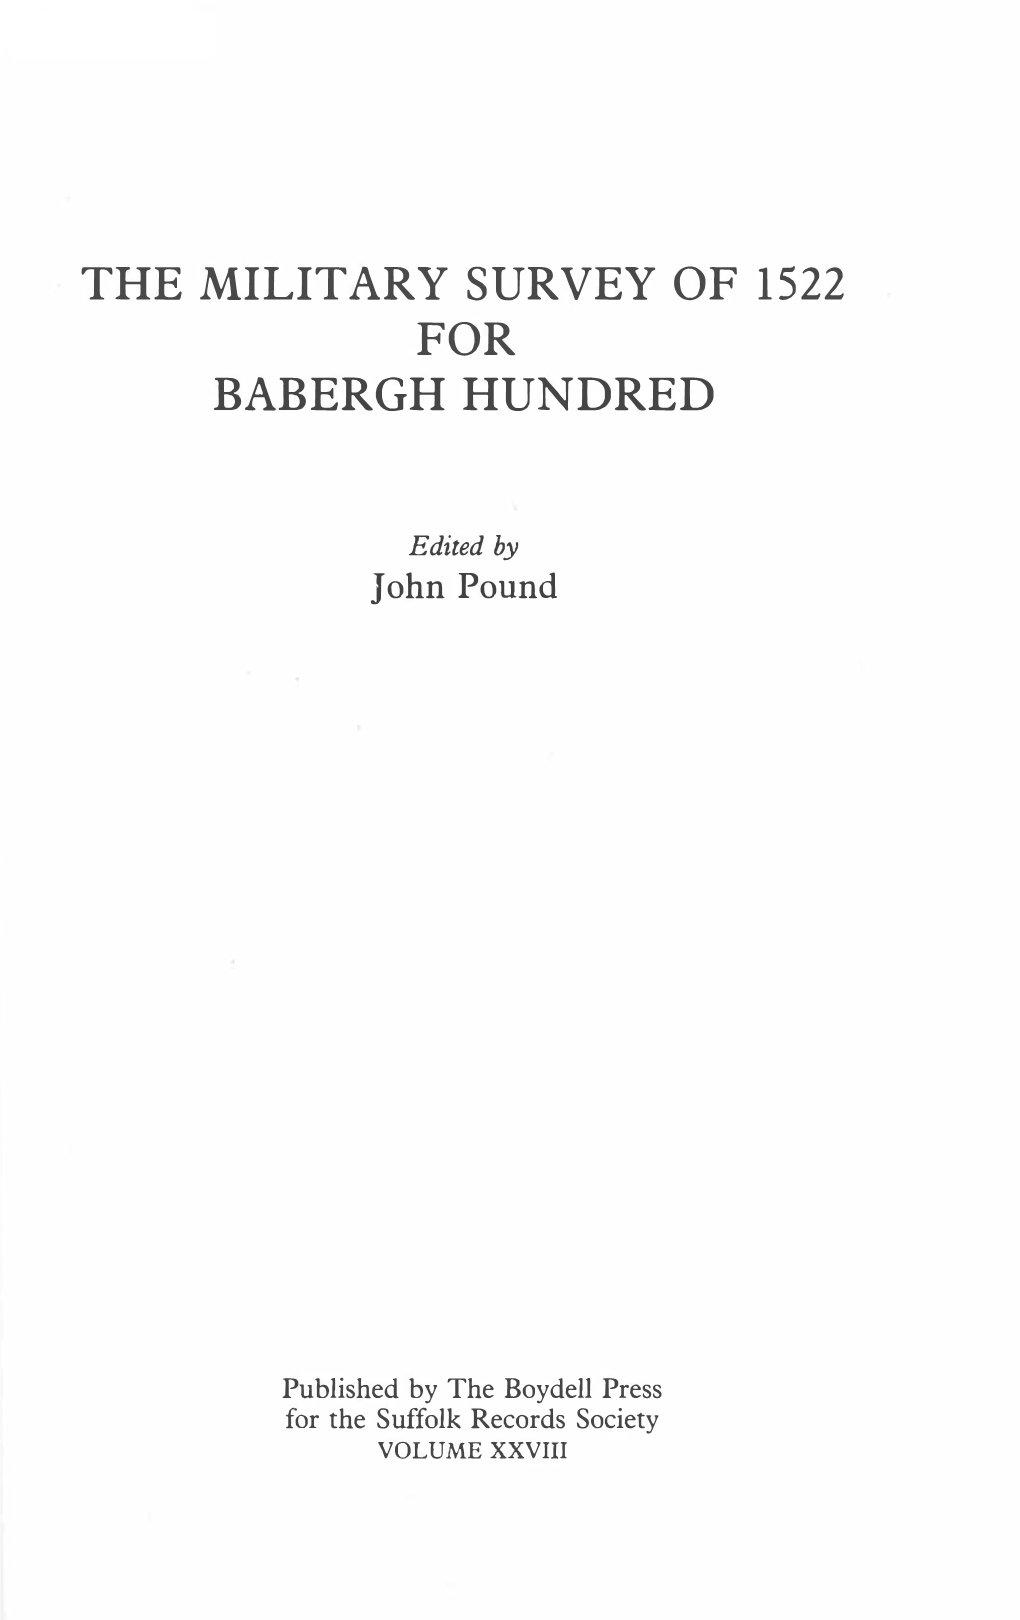 The Military Survey of 1522 for Babergh Hundred